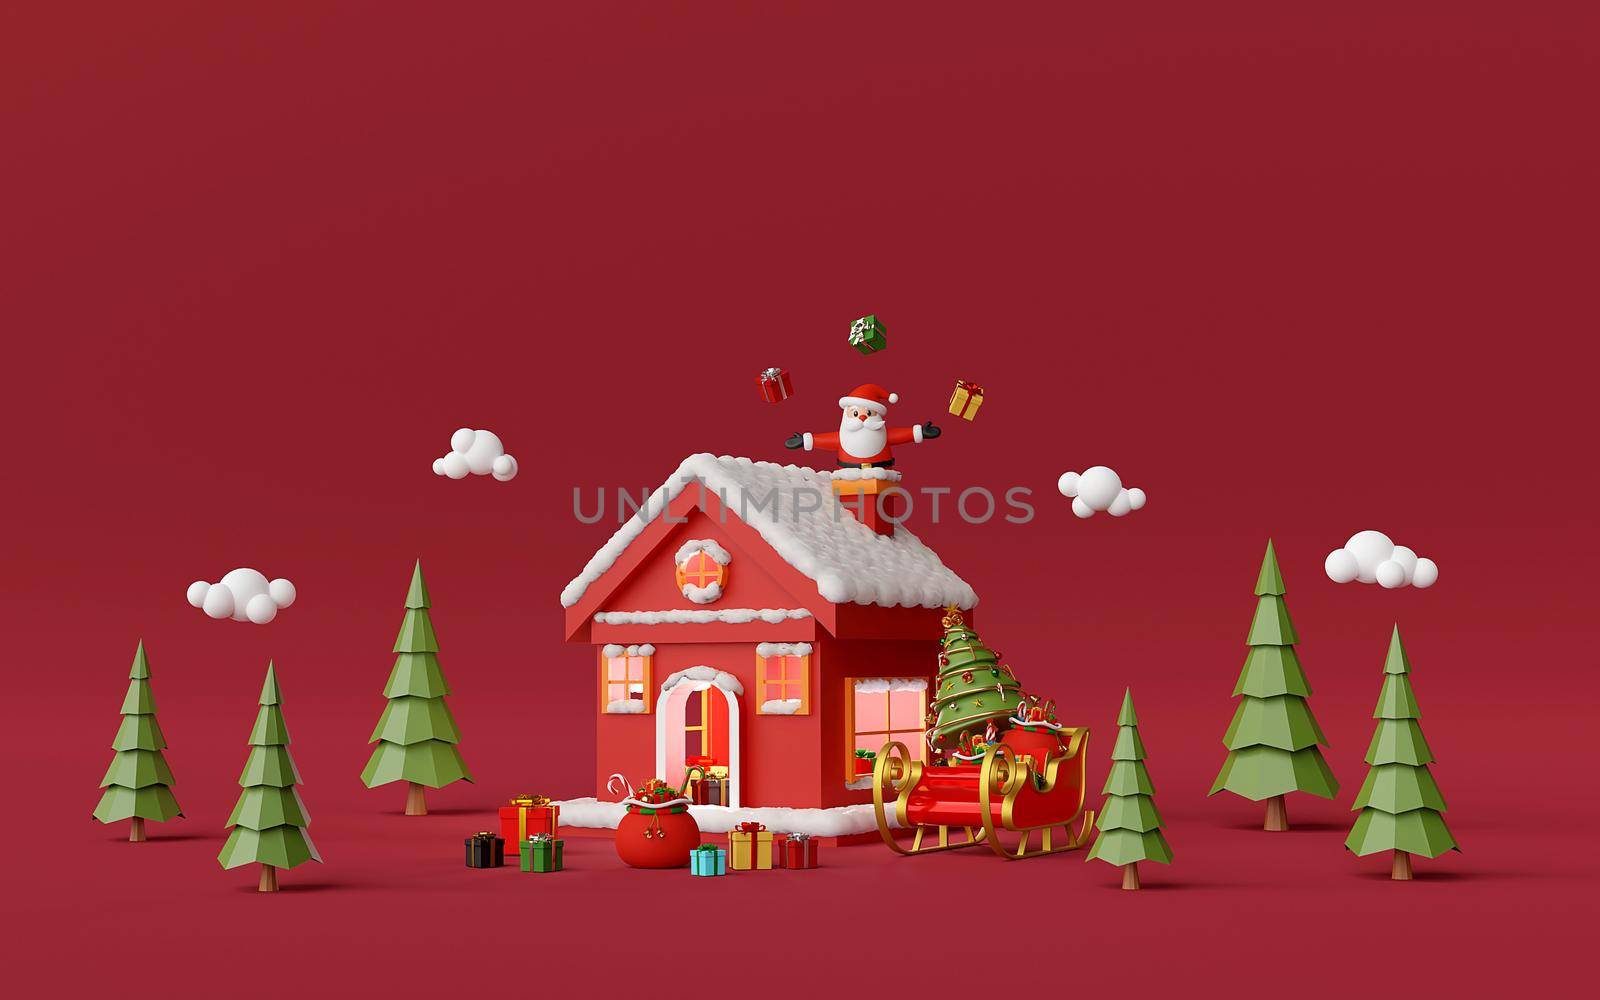 Merry Christmas and Happy New Year, Red house in the pine forest with Santa Claus in chimney, 3d rendering by nutzchotwarut